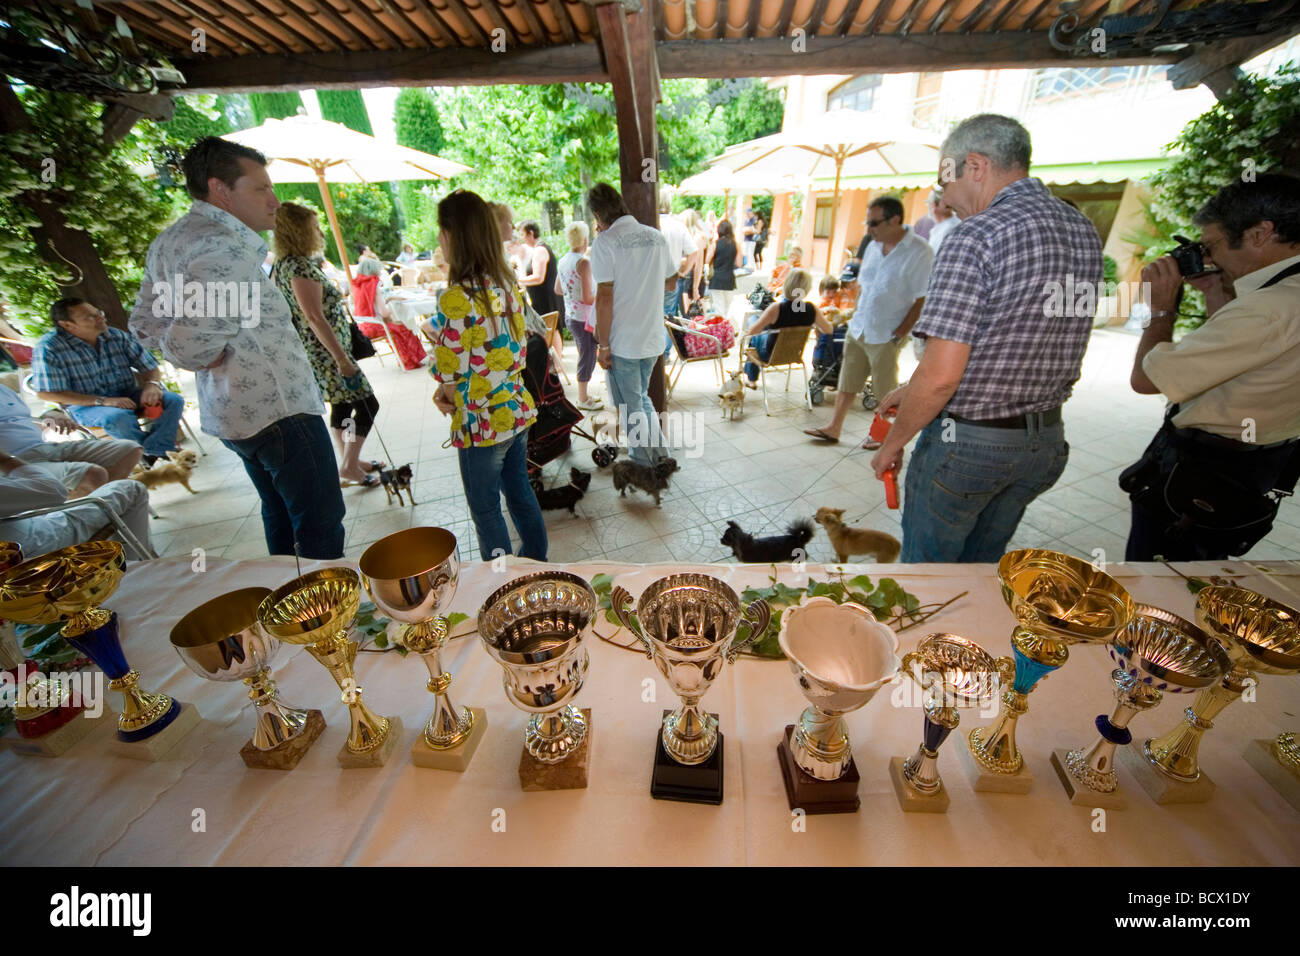 Trophies on display at the annual meeting of the Alpes-Maritimes regional chihuaua owners club, Carros, France, 31 May 2009 Stock Photo